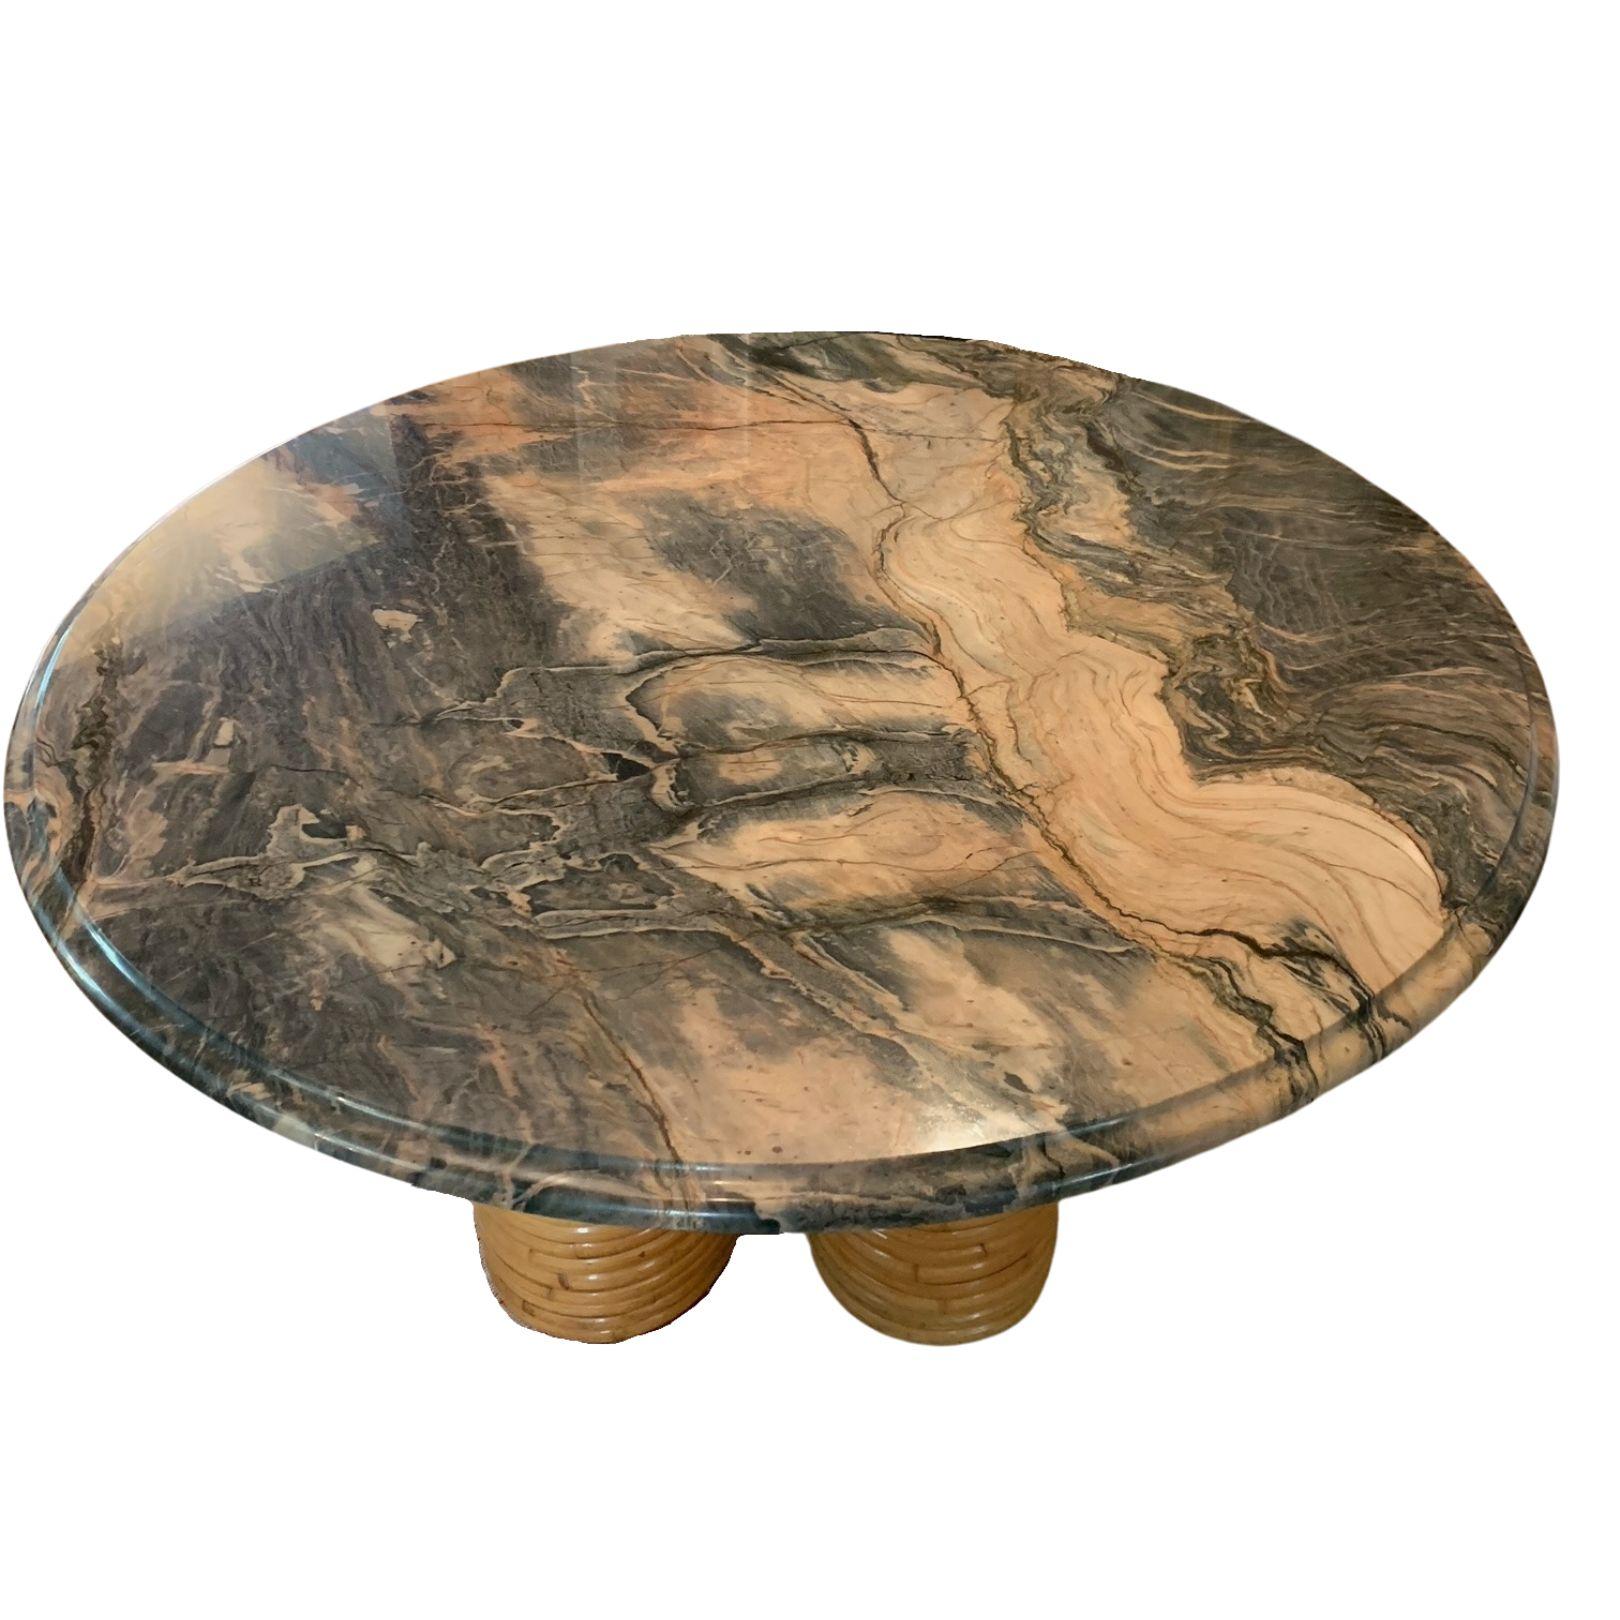 This maximalist, modern dining table would make a beautiful addition to any den or dining room. Crafted in the United States in 2020, this unique piece is composed of a heavy, round marble table top with dramatic grey, pink and brown veining. It